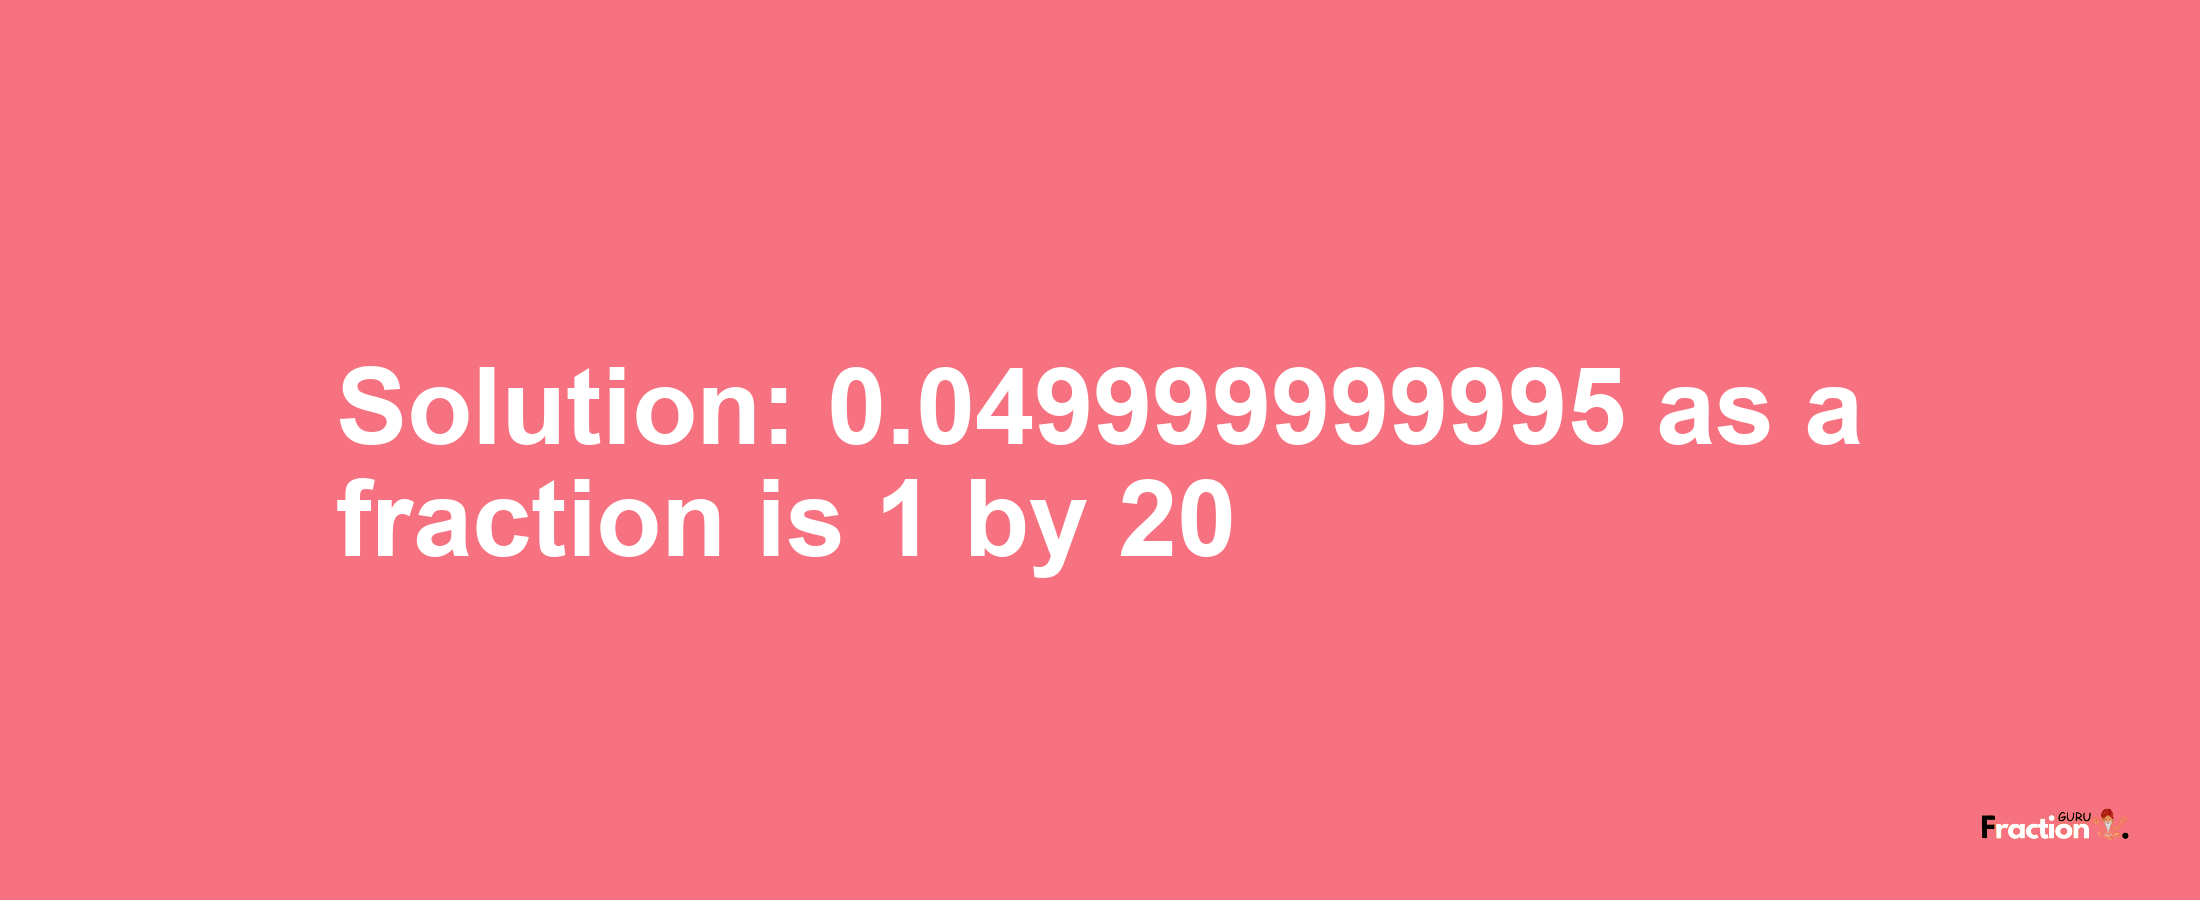 Solution:0.049999999995 as a fraction is 1/20